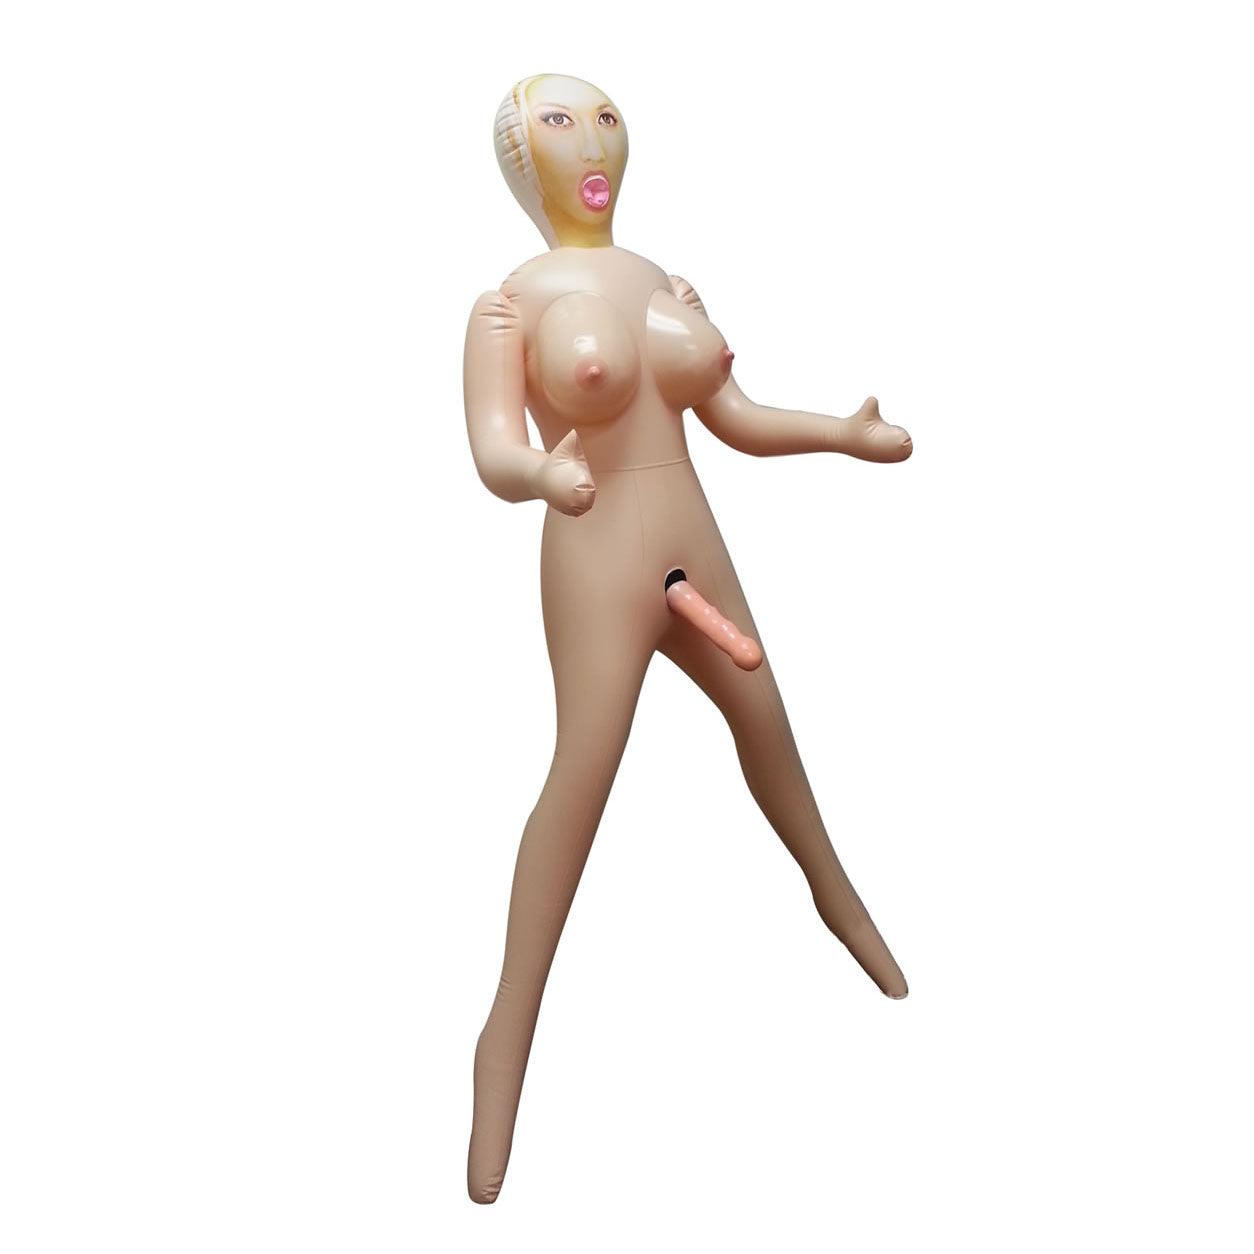 I Am Angie The Transsexual Love Doll - Adult Planet - Online Sex Toys Shop UK